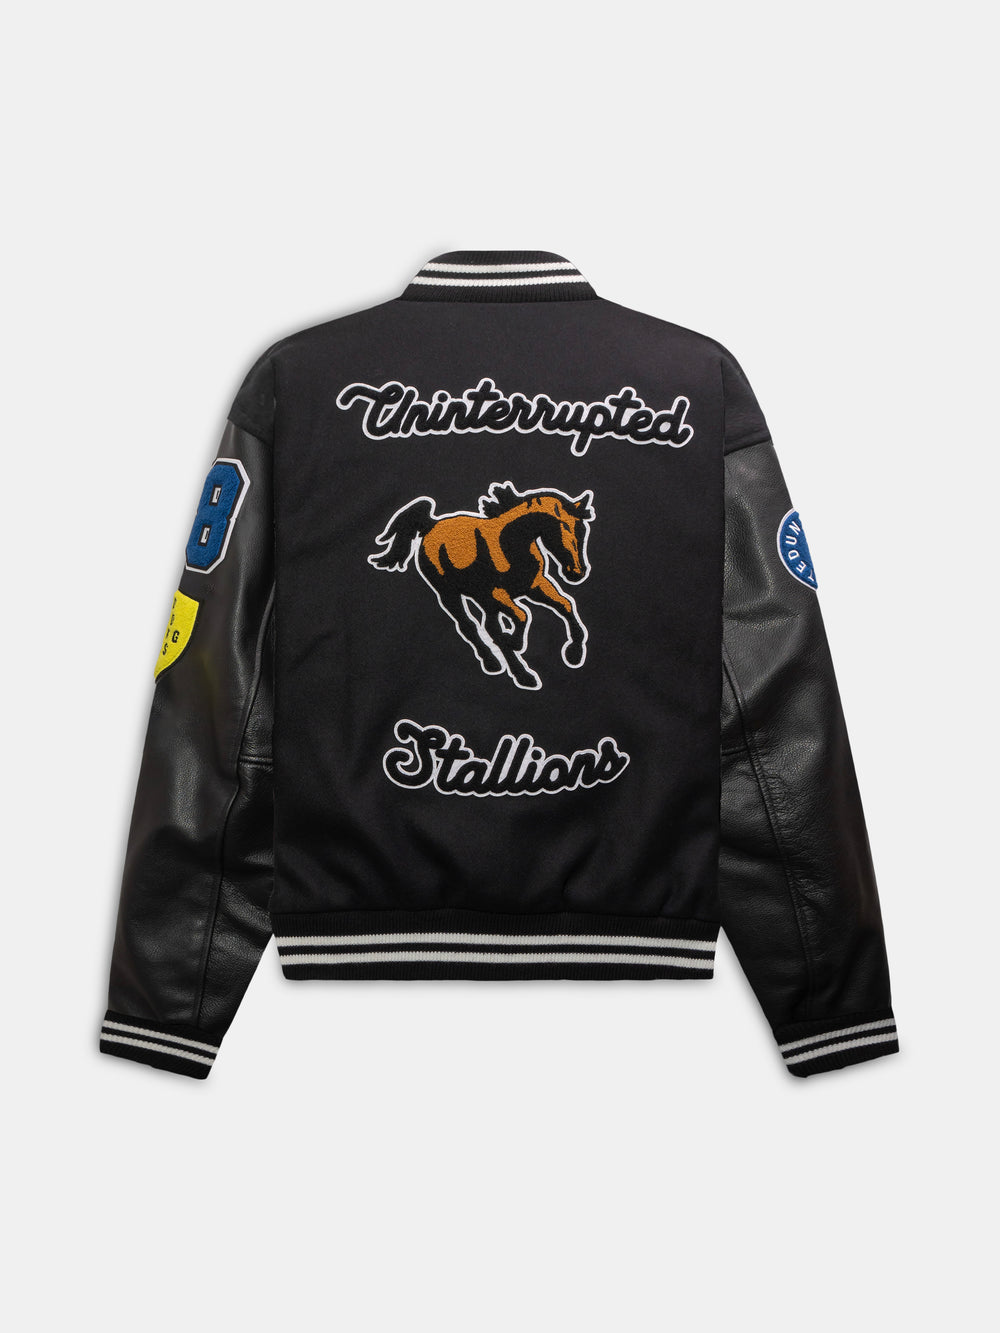 back of the varsity jacket with the words: "Uninterrupted Stallions" and a patch of a large horse